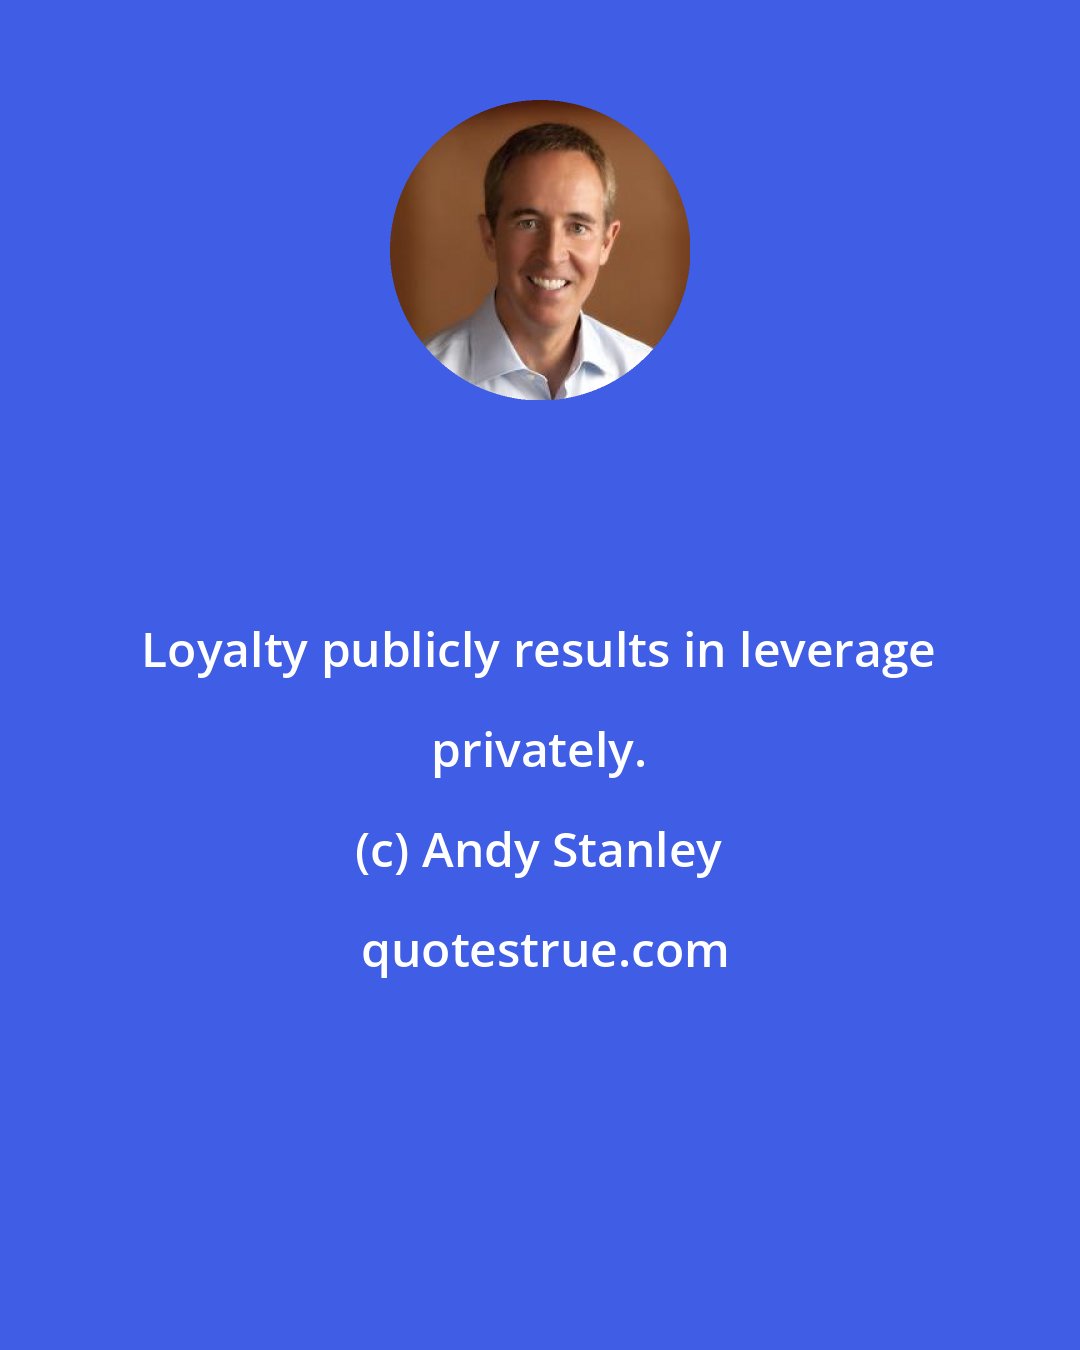 Andy Stanley: Loyalty publicly results in leverage privately.